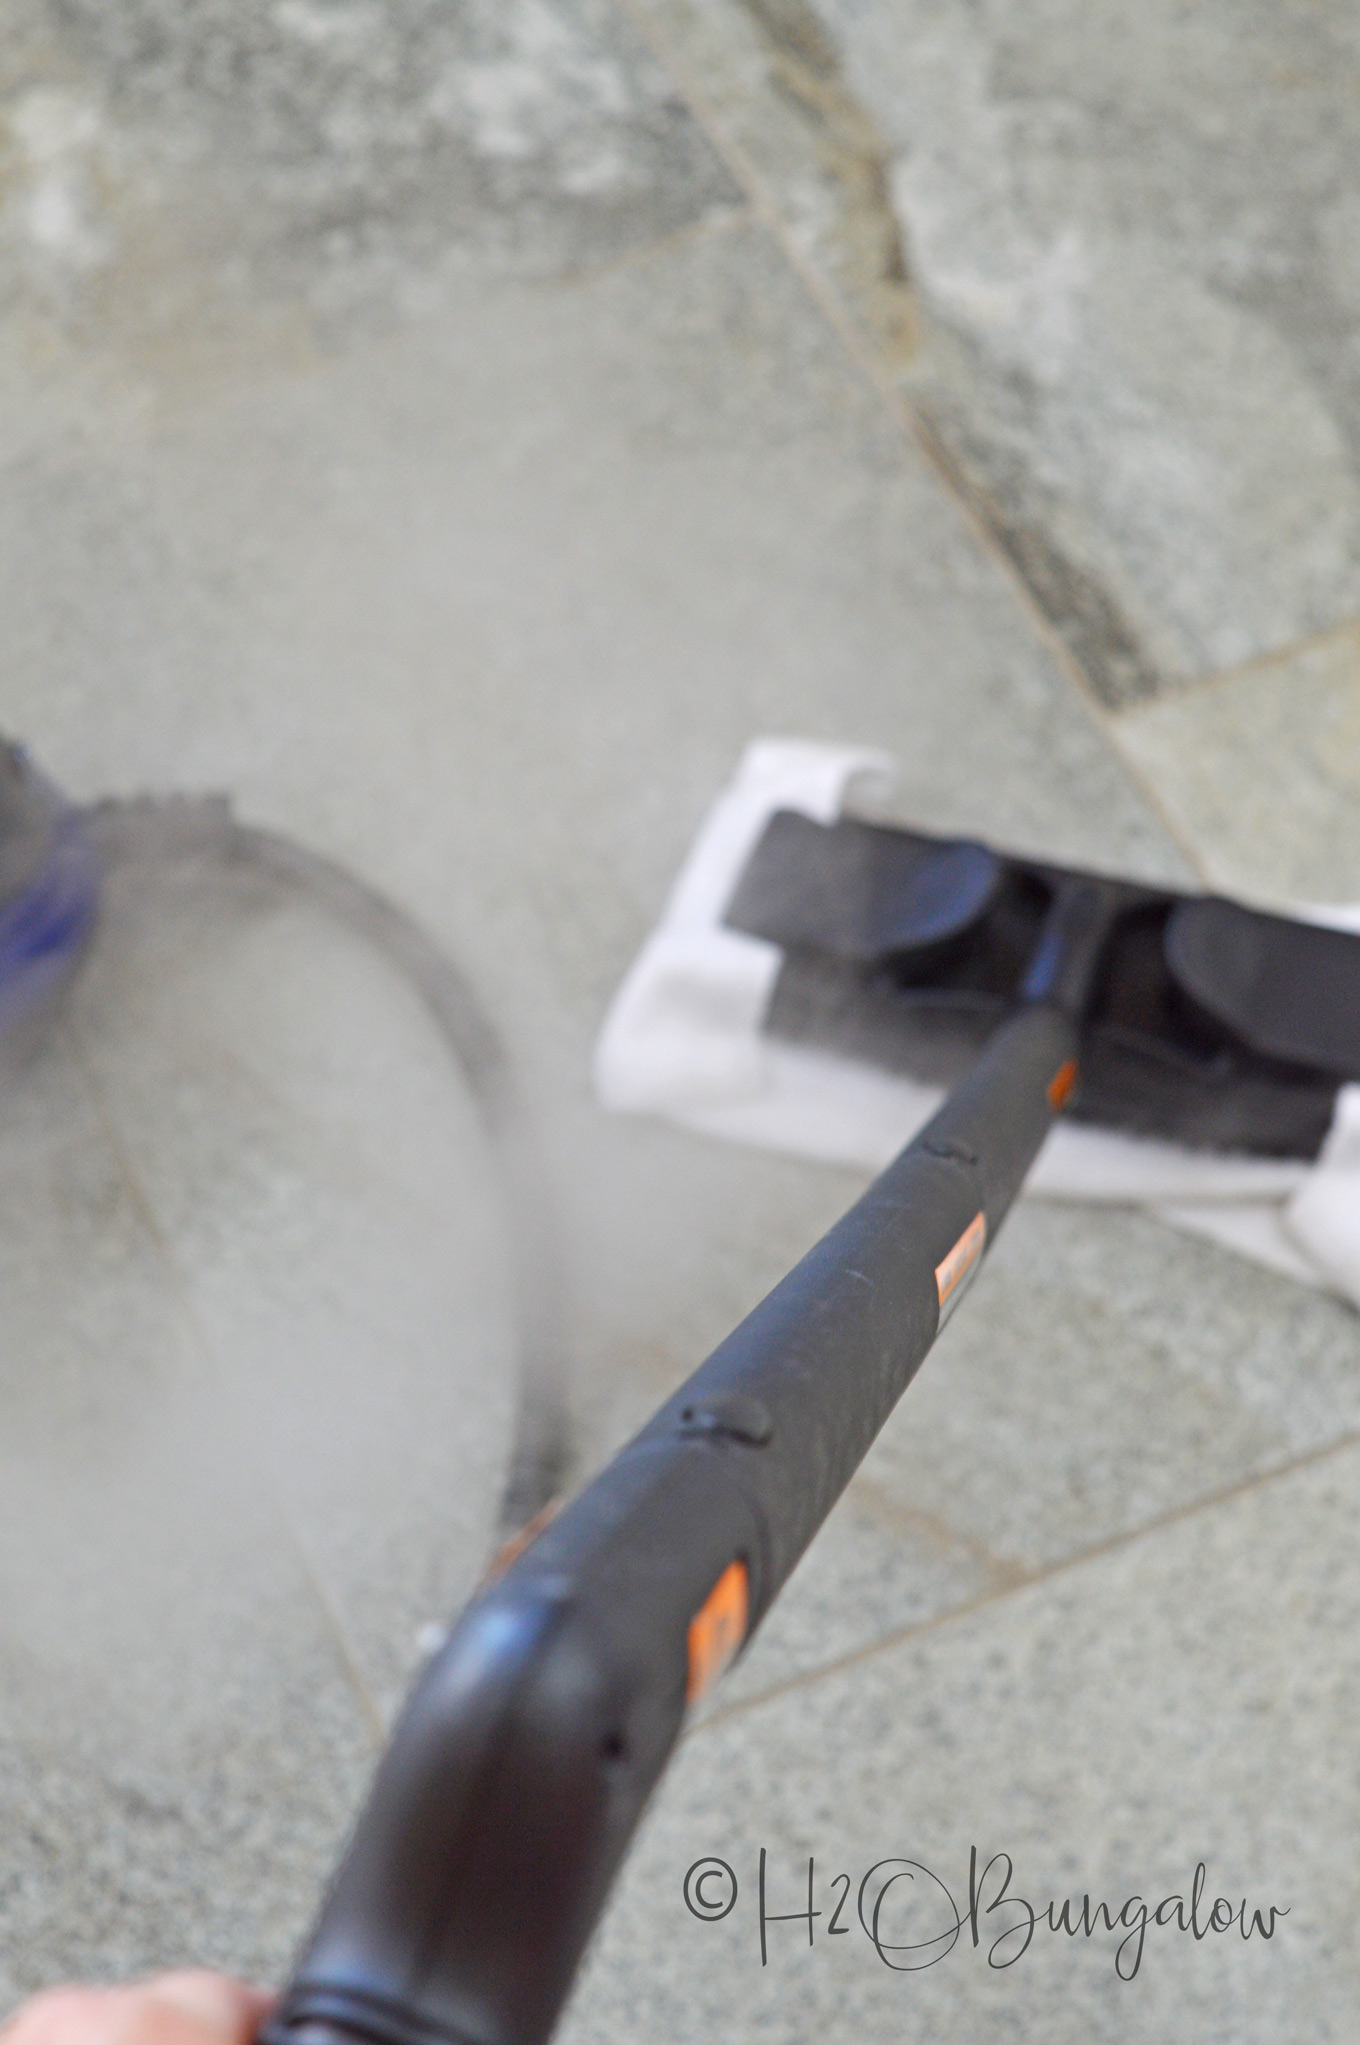 Deep clean tile floors with steam tutorial. Get a deep clean and kill 99% of the bacteria without harsh chemicals using the HomeRight Steam Machine Plus. I share a quick video to show how easy it is to deep clean tile floors and other surfaces with steam. 